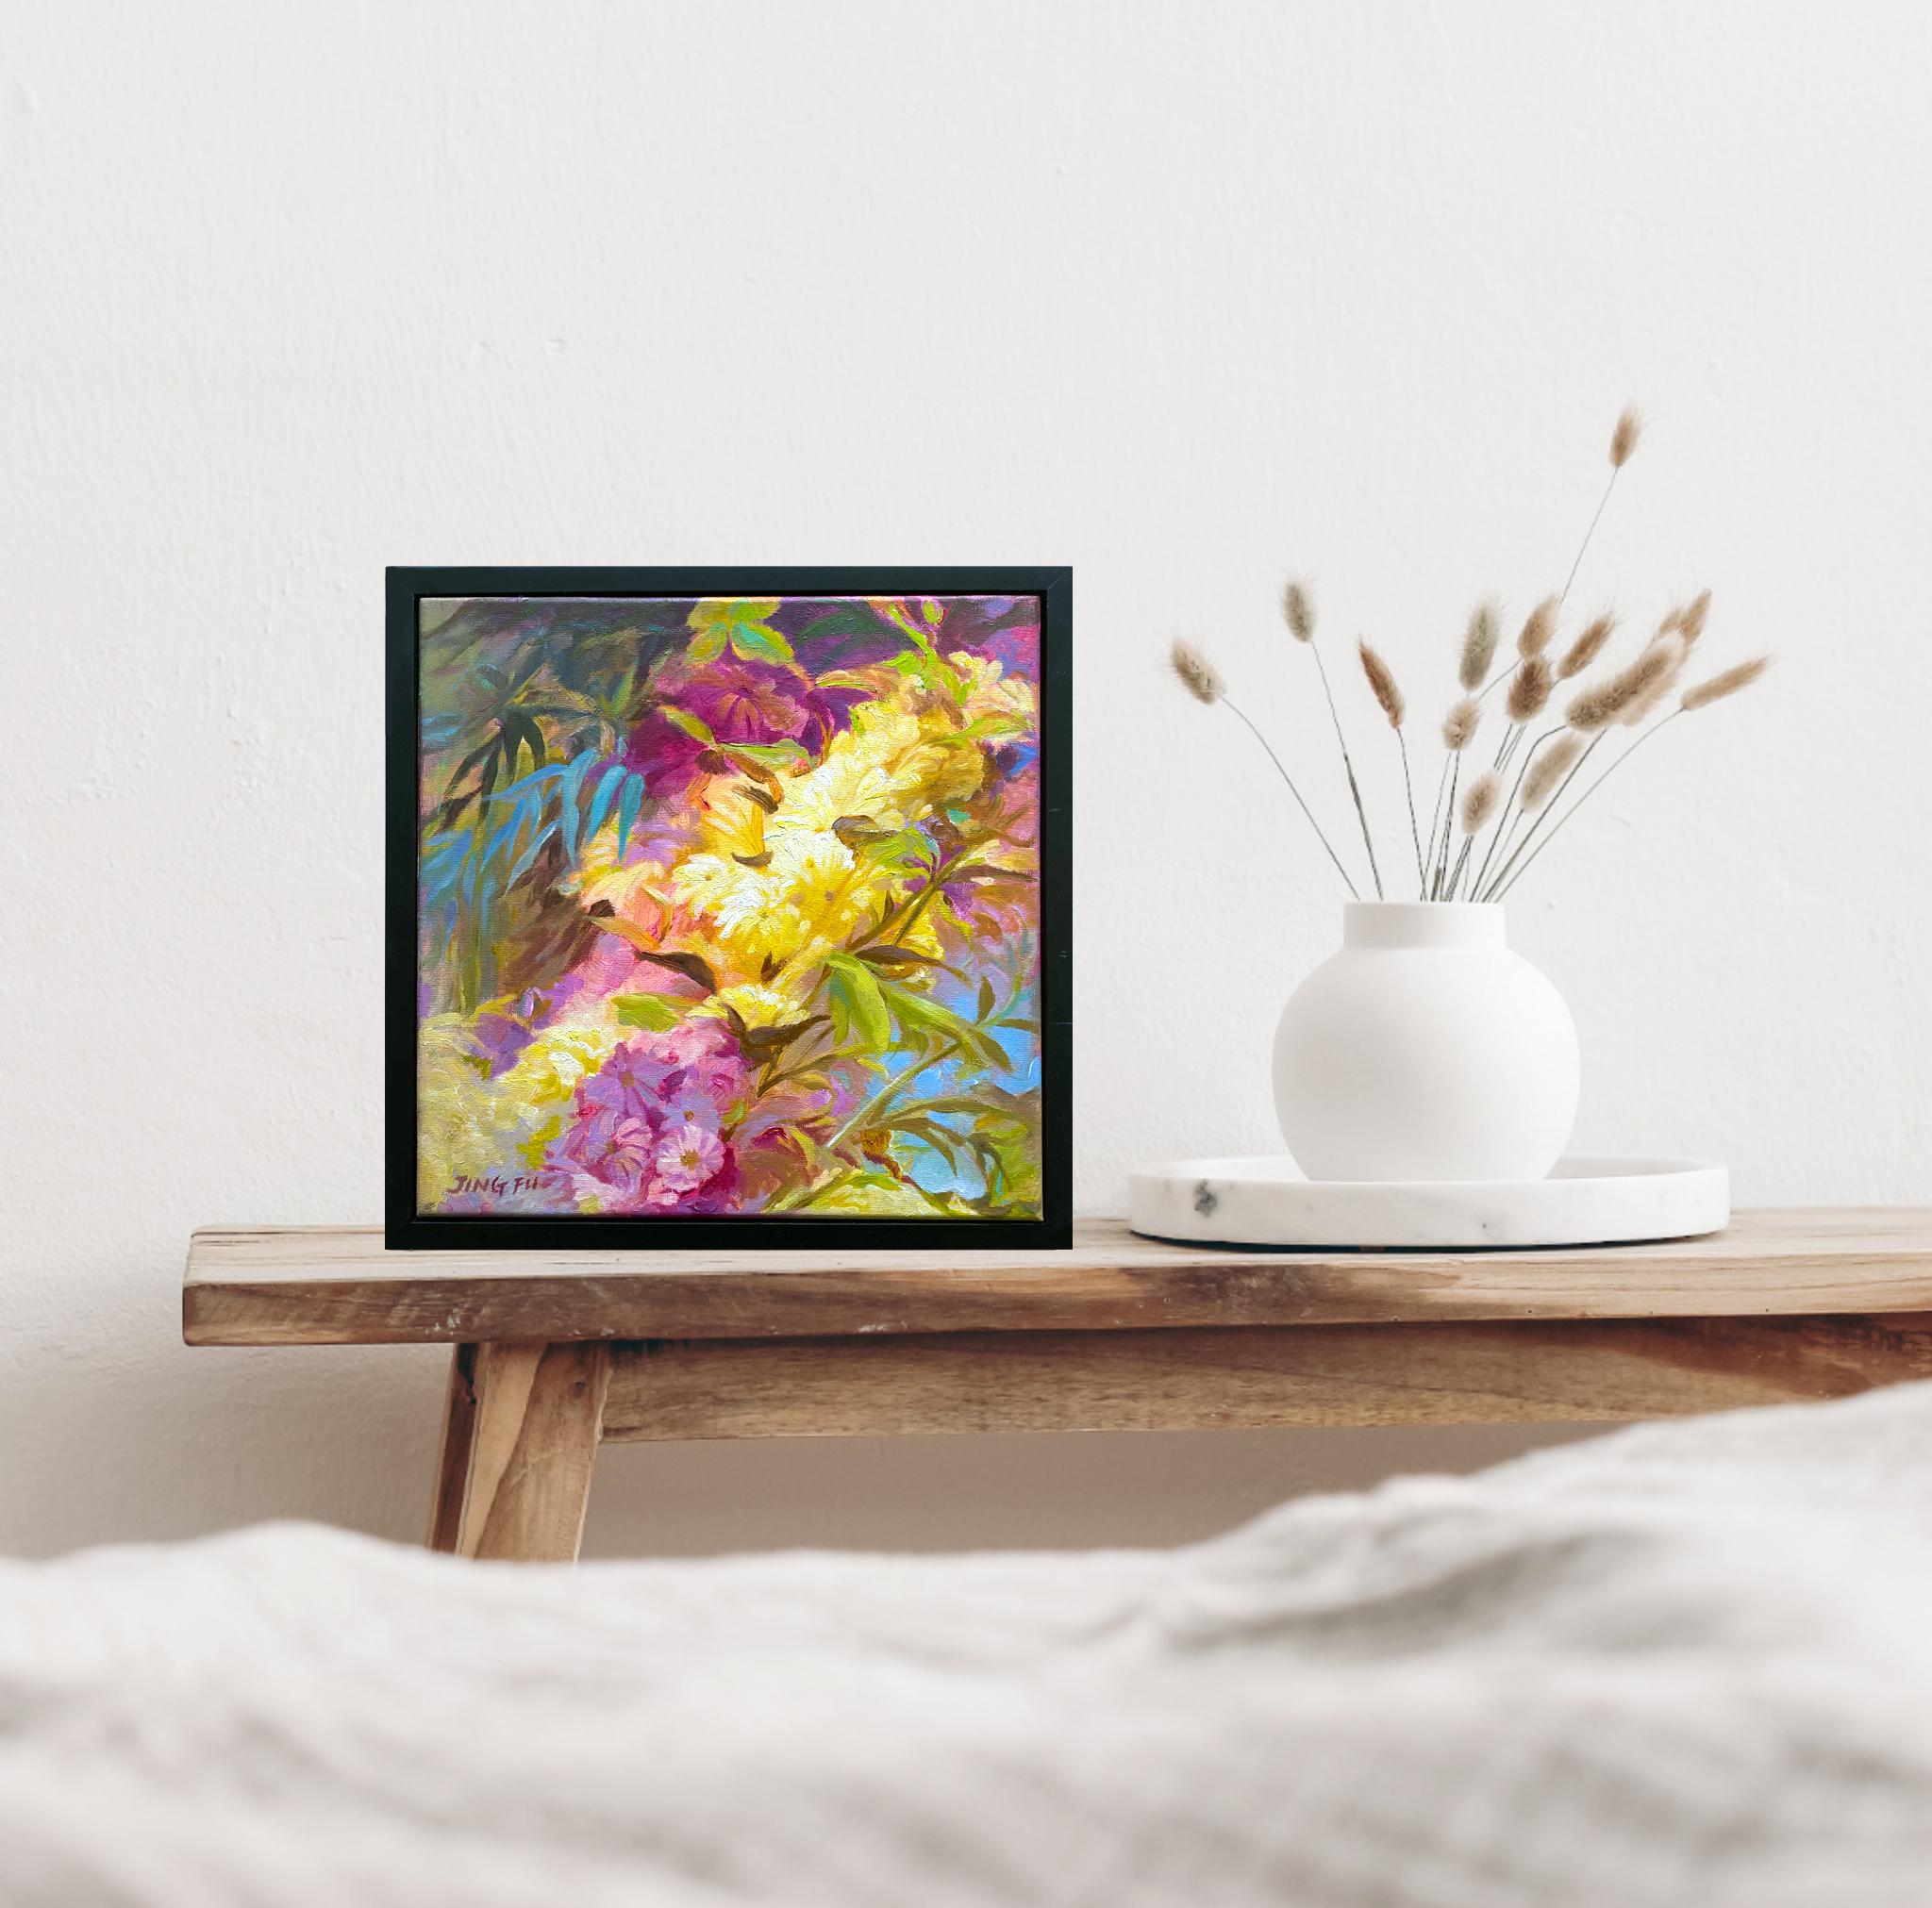 Zest is a vibrant oil painting on canvas depicting a colorful flower bouquet in pink and yellow.
Comes framed and ready to hang.

